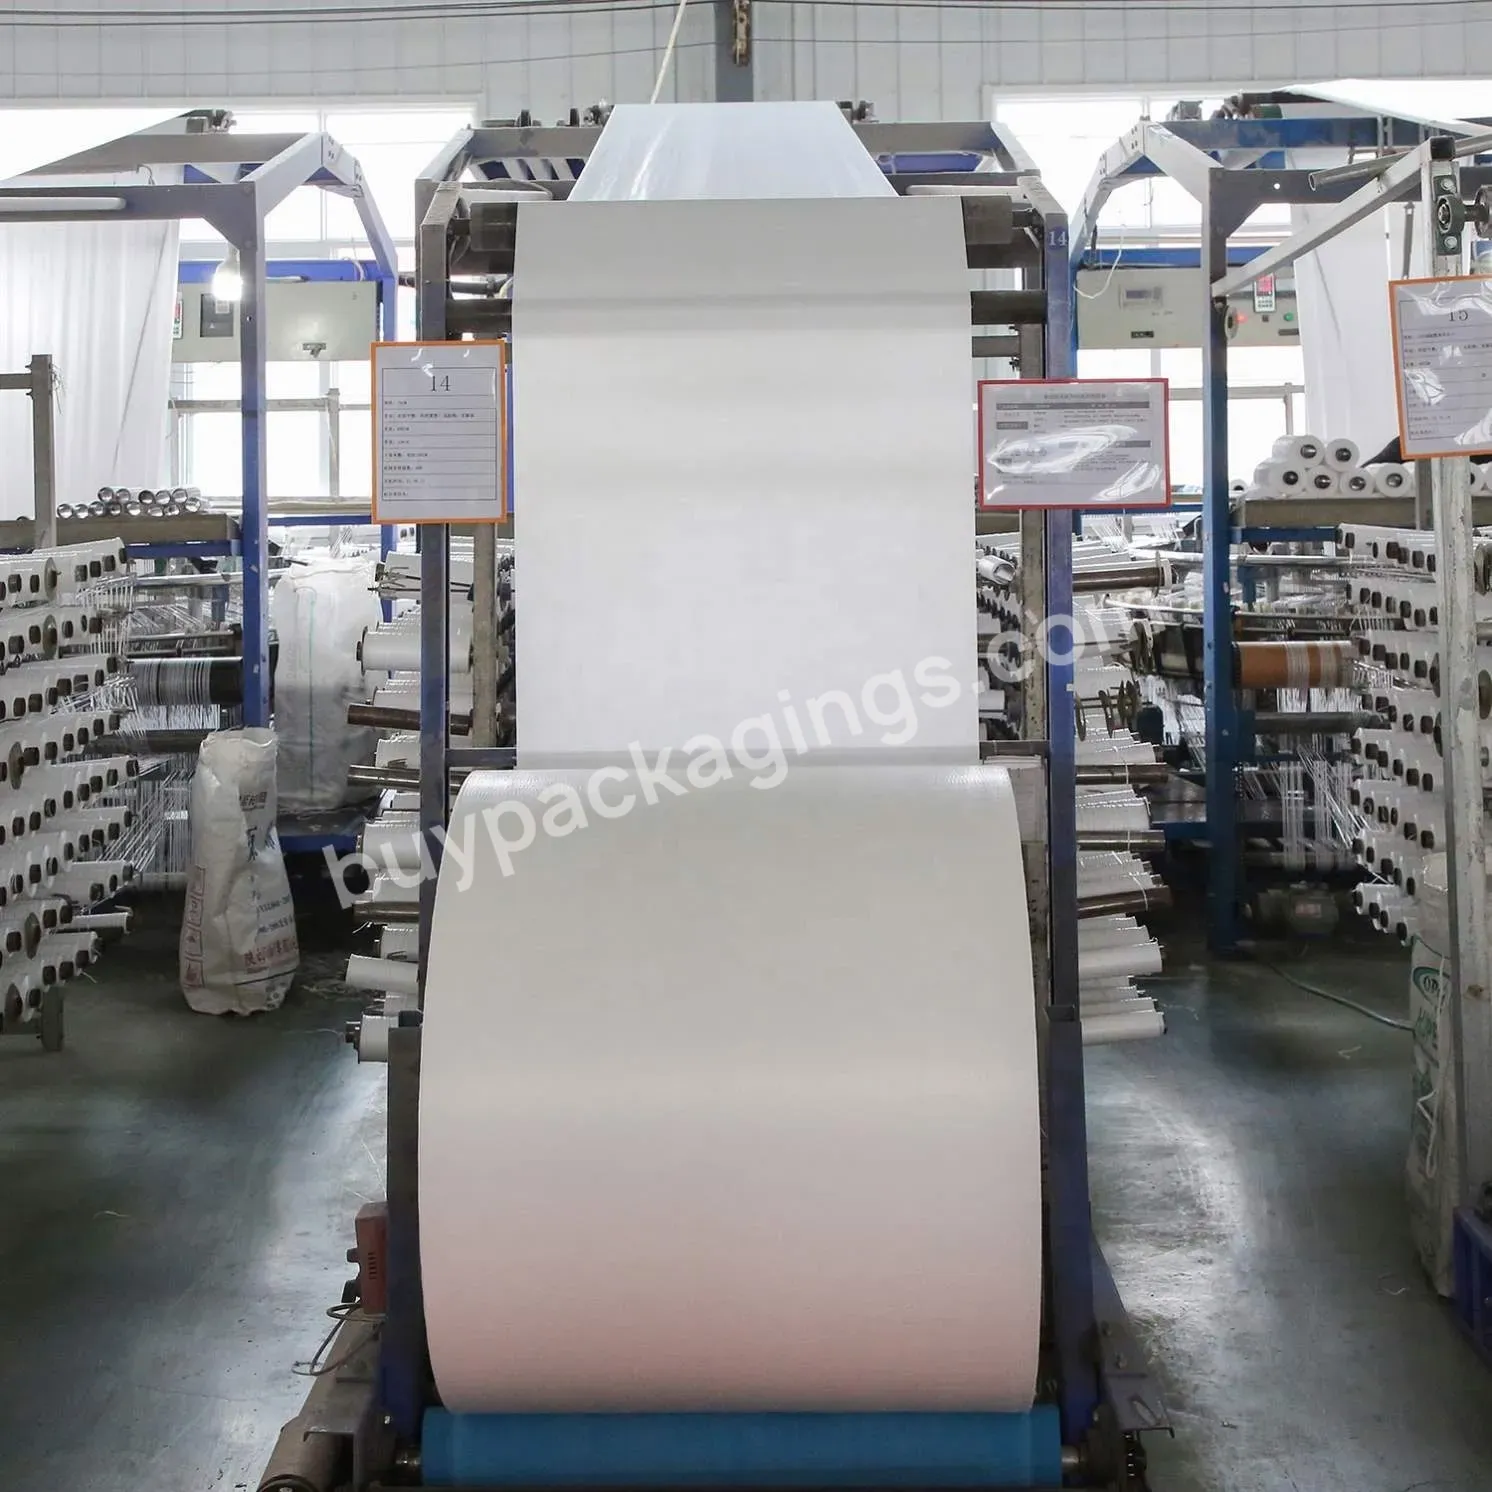 Grs Ce Oem Pp Polypropylene Woven Fabric In Roll Woven Bag Agriculture Recyclable 3 Tons 100% Virgin Pp Accept 38-230gsm Cn;shn - Buy Polypropylene Woven Fabric,Woven Fabric In Roll,Woven Fabric.